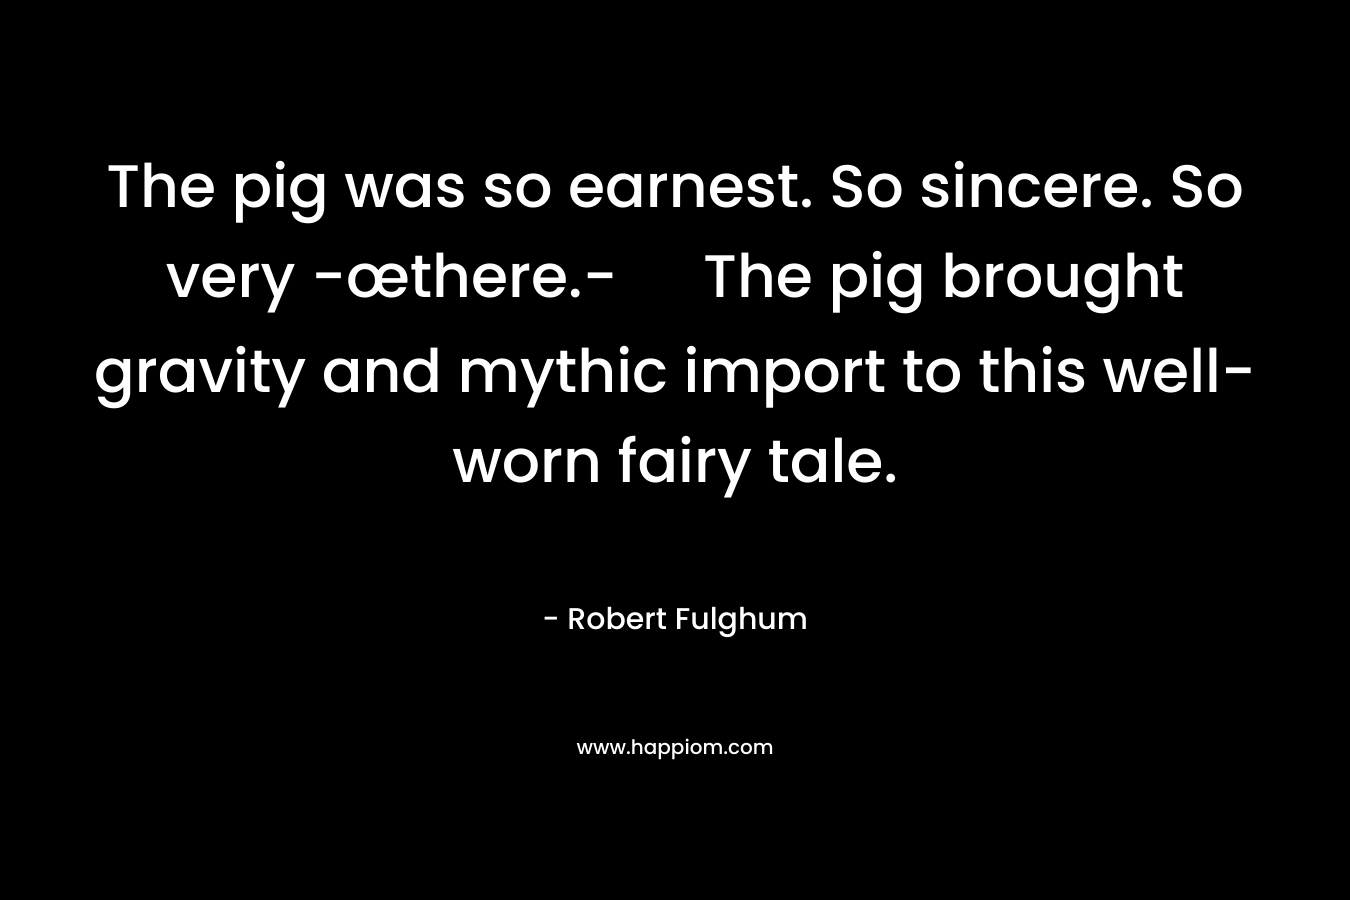 The pig was so earnest. So sincere. So very -œthere.- The pig brought gravity and mythic import to this well-worn fairy tale.